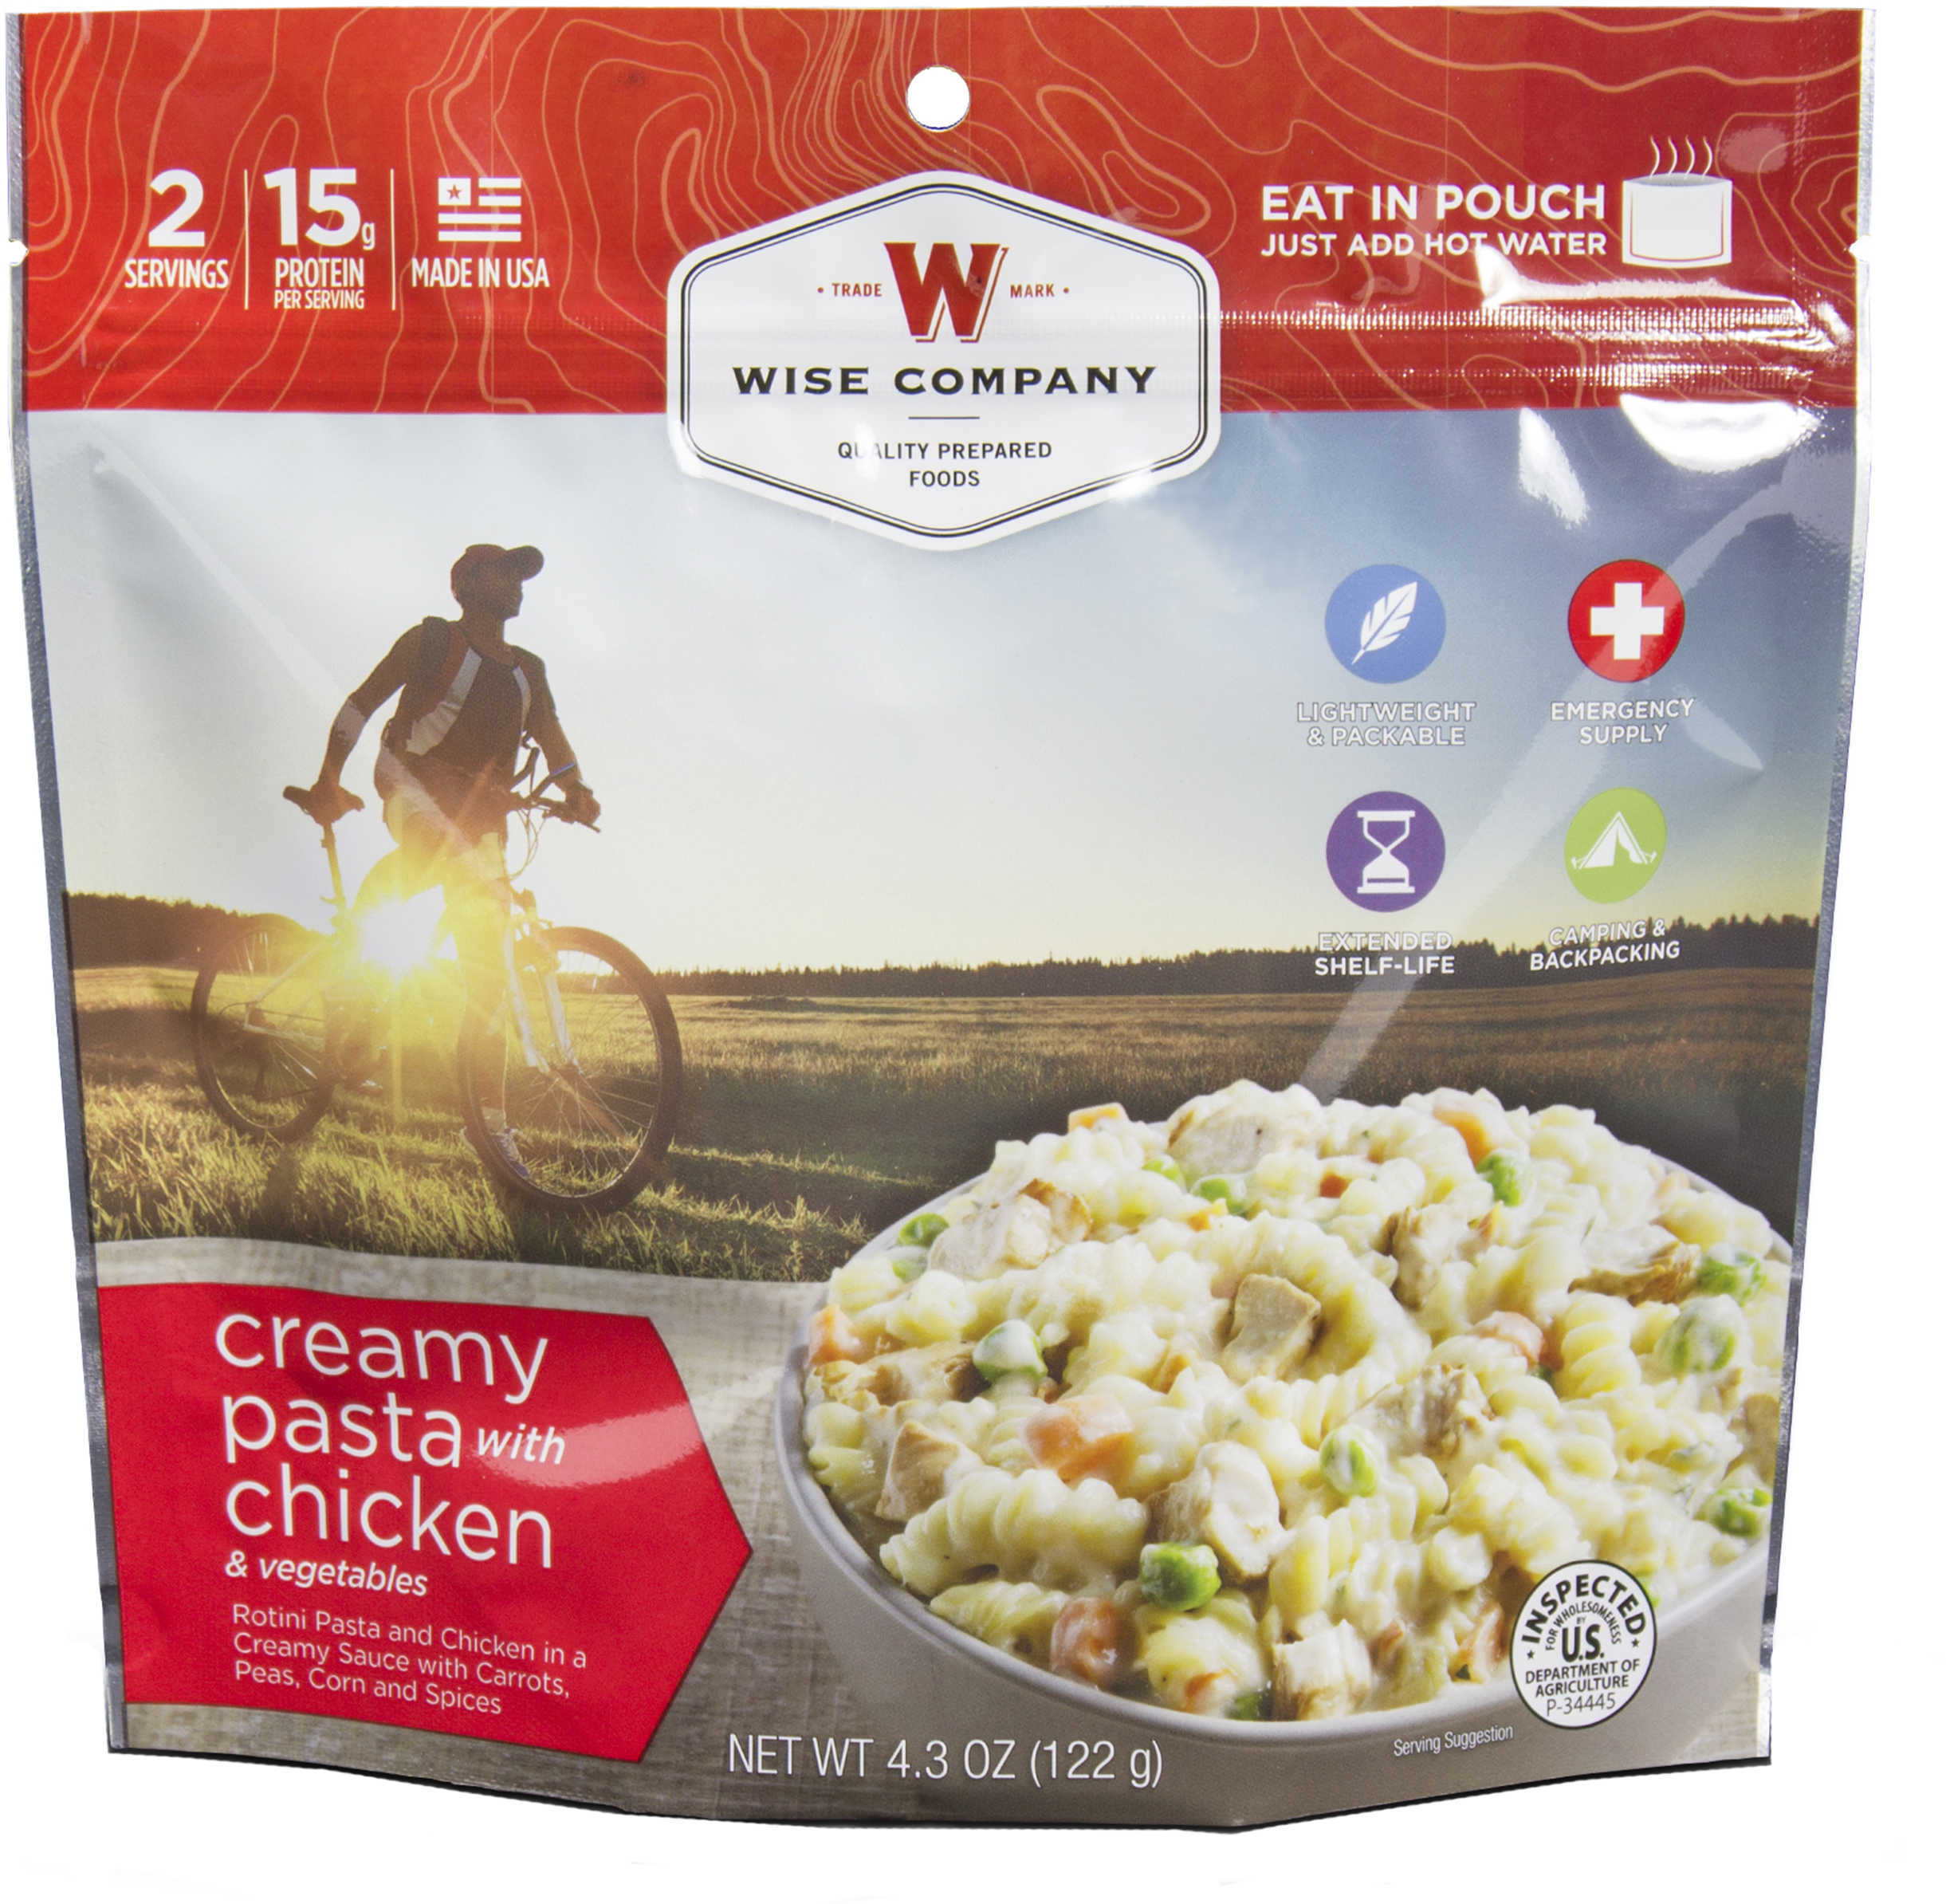 Wise Foods RW05-006 Outdoor Kit Crest Peak Creamy Pasta And Chicken Meat/Pasta 6 Per Case 2.5 Servings Camp